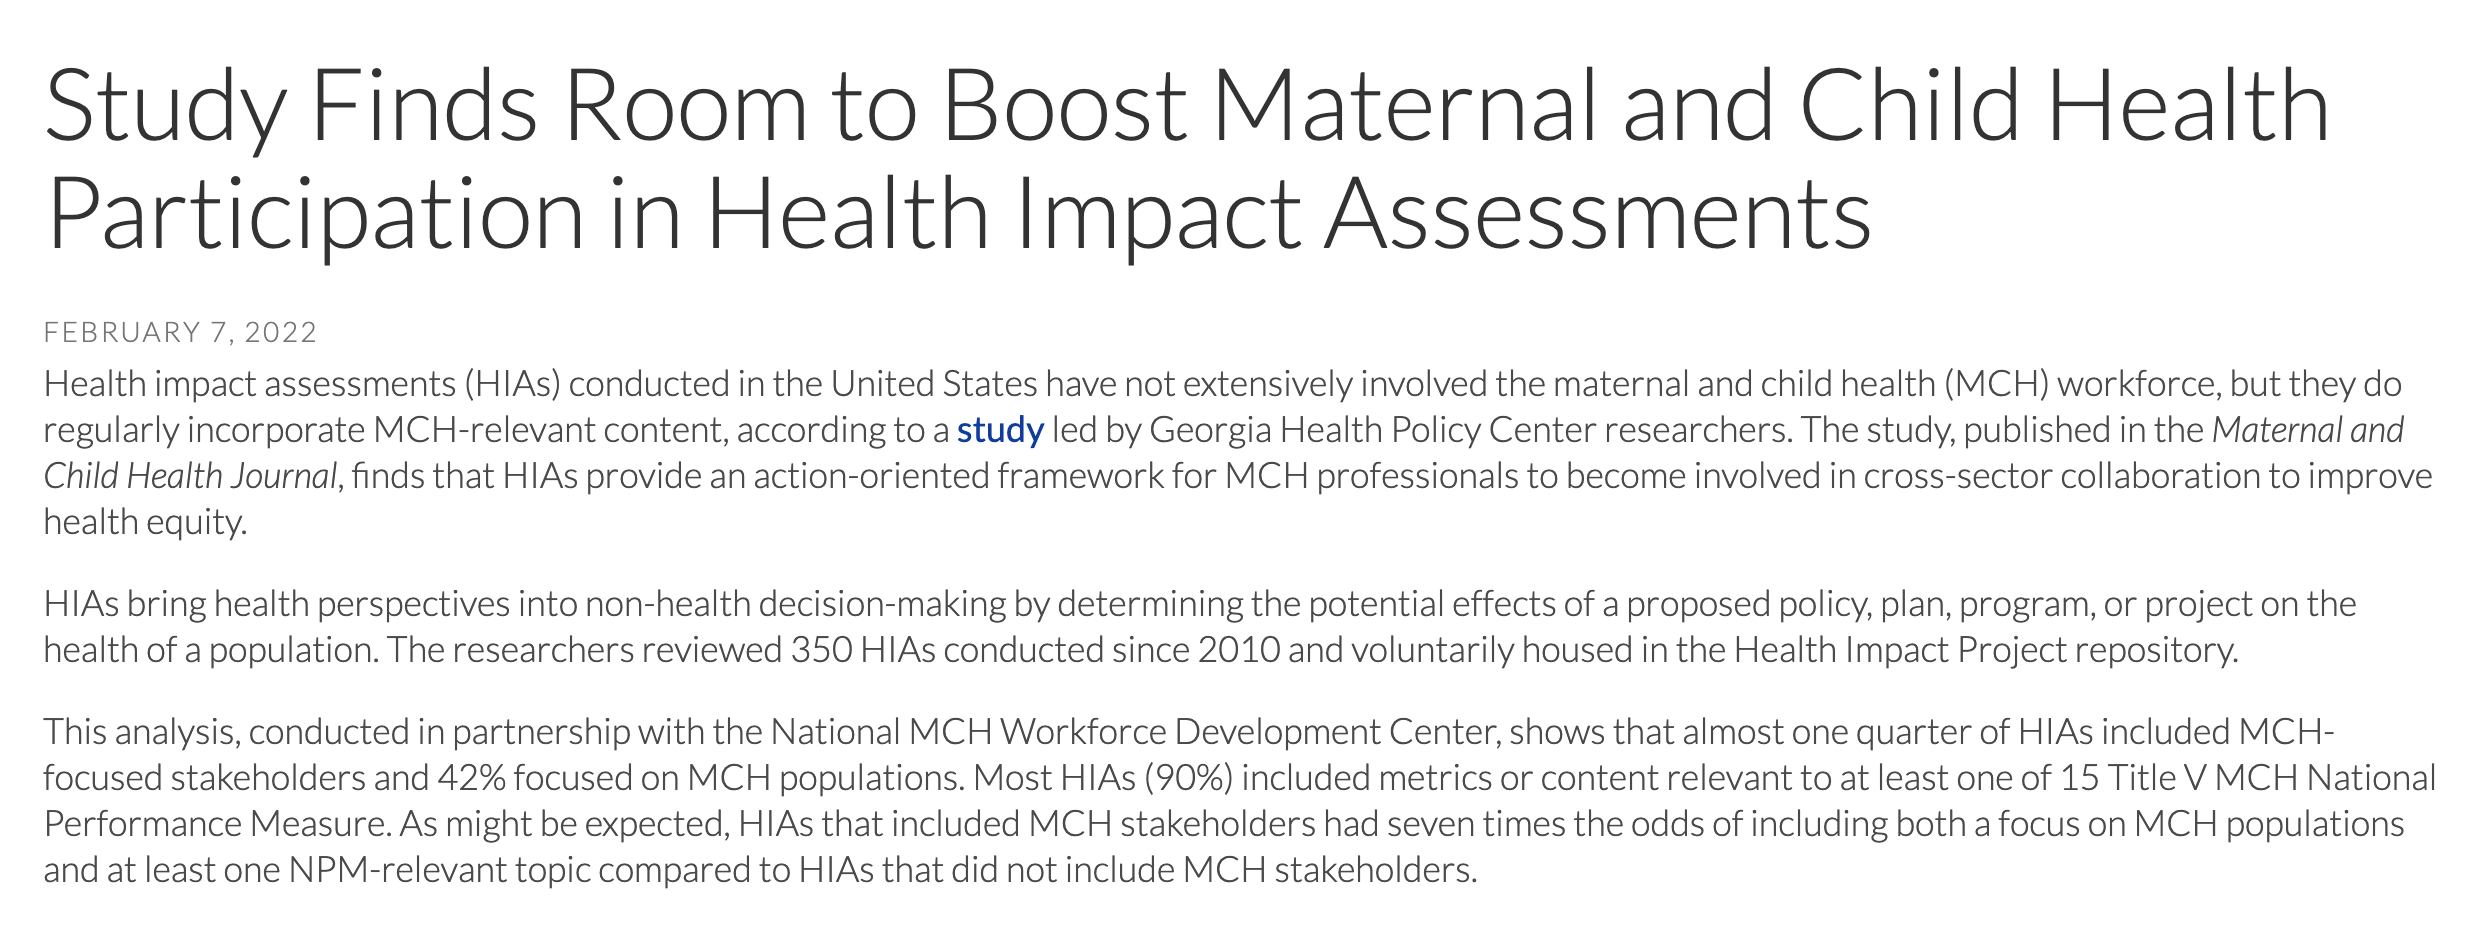 Study Finds Room to Boost Maternal and Child Health Participation in Health Impact Assessments